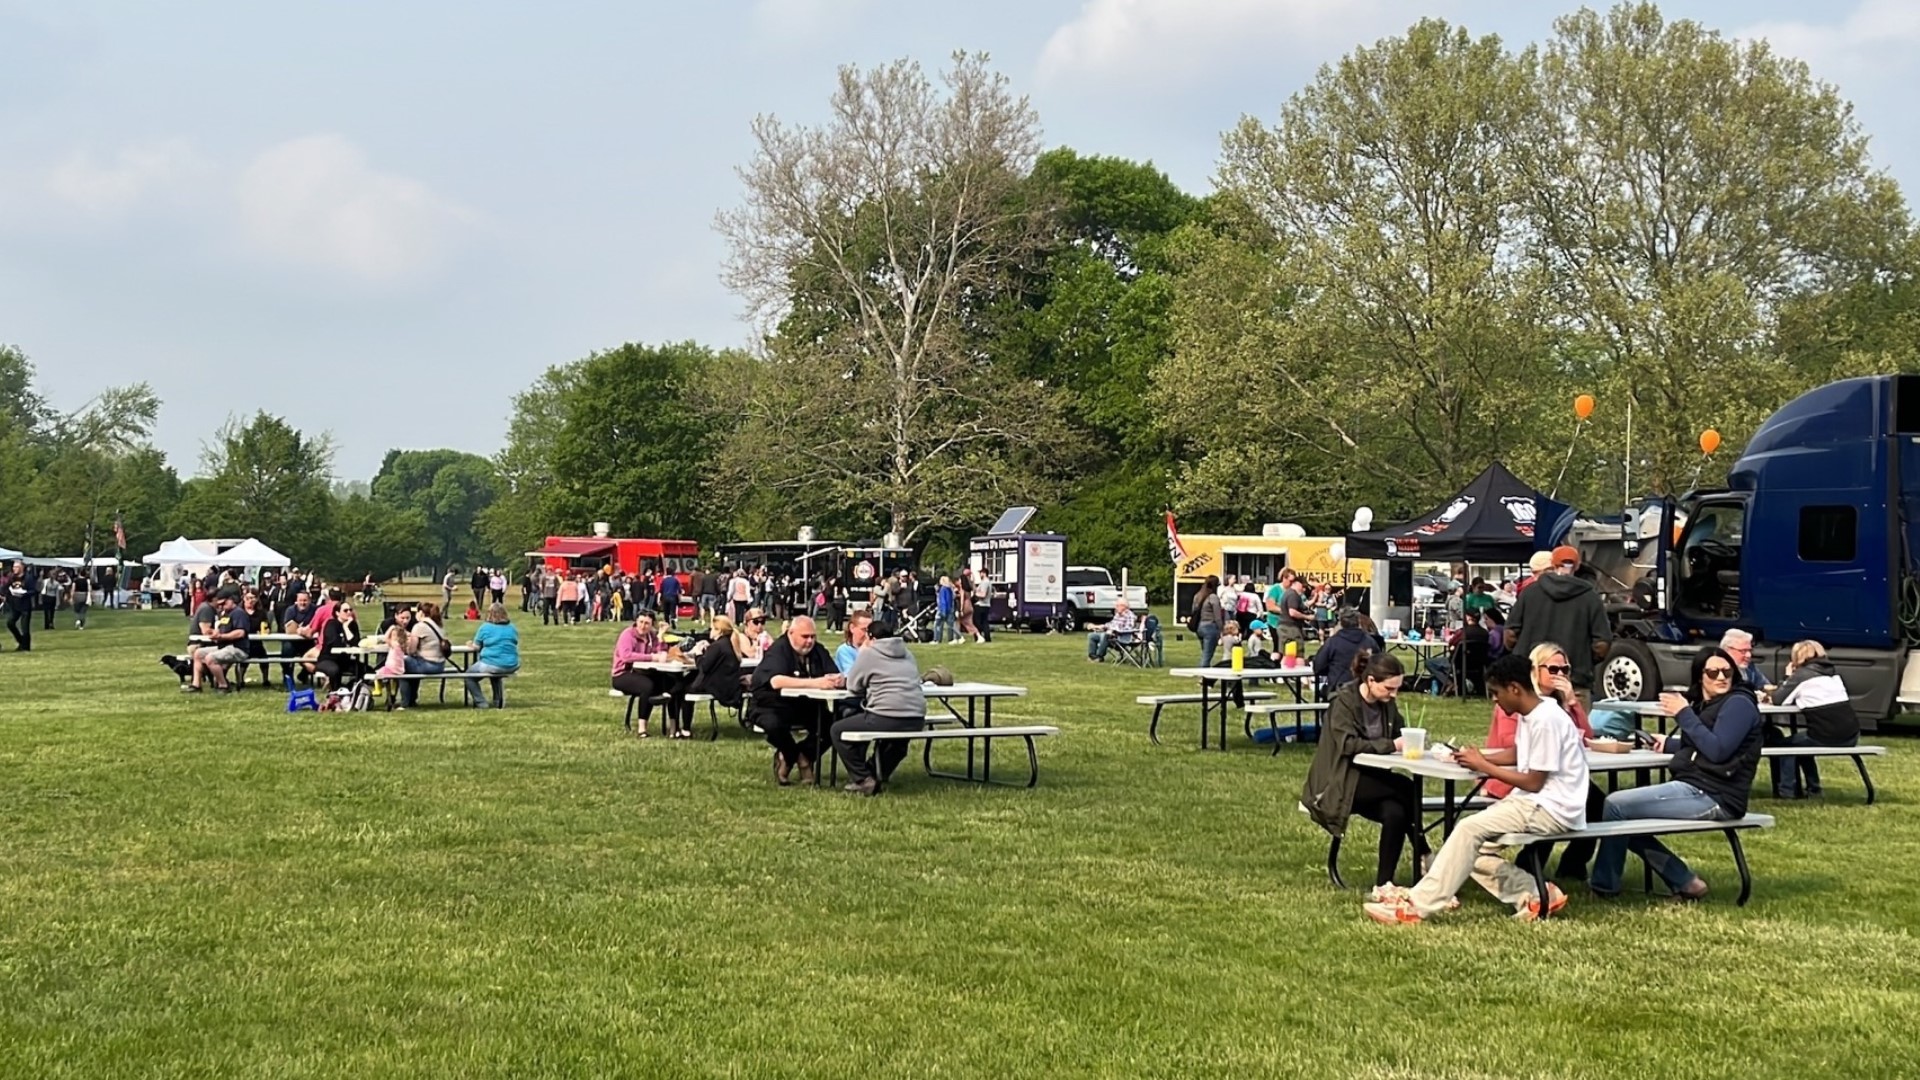 Friday May 19th marks the beginning of the 7th annual Food Truck Fridays at Riverside Park in Grand Rapids! Here's what's new for 2023!